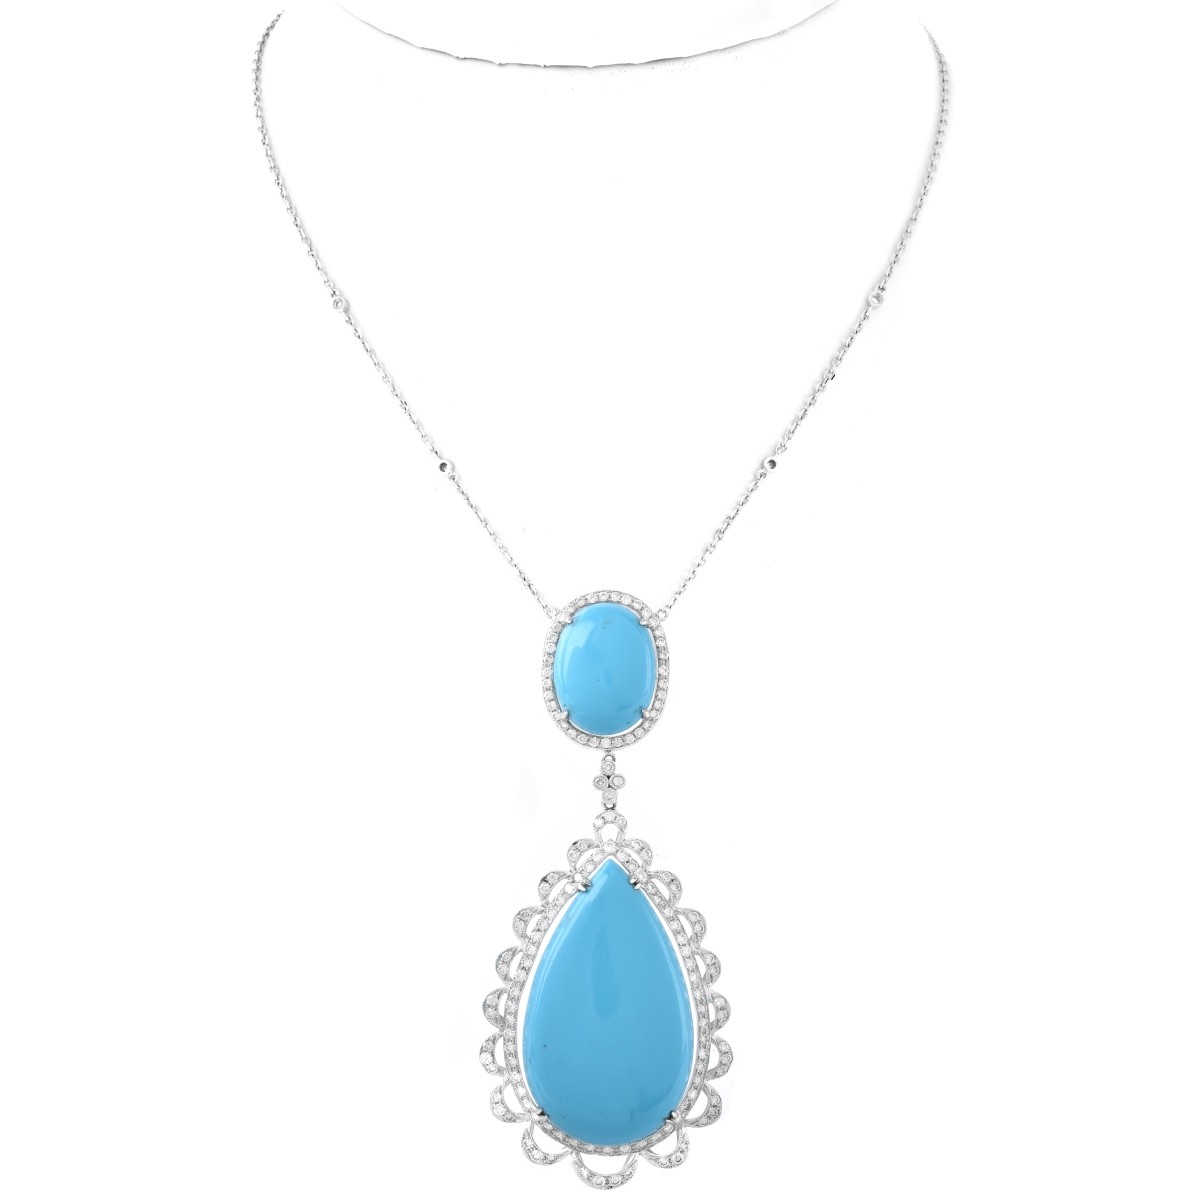 Diamond, Turquoise and 14K Gold Necklace